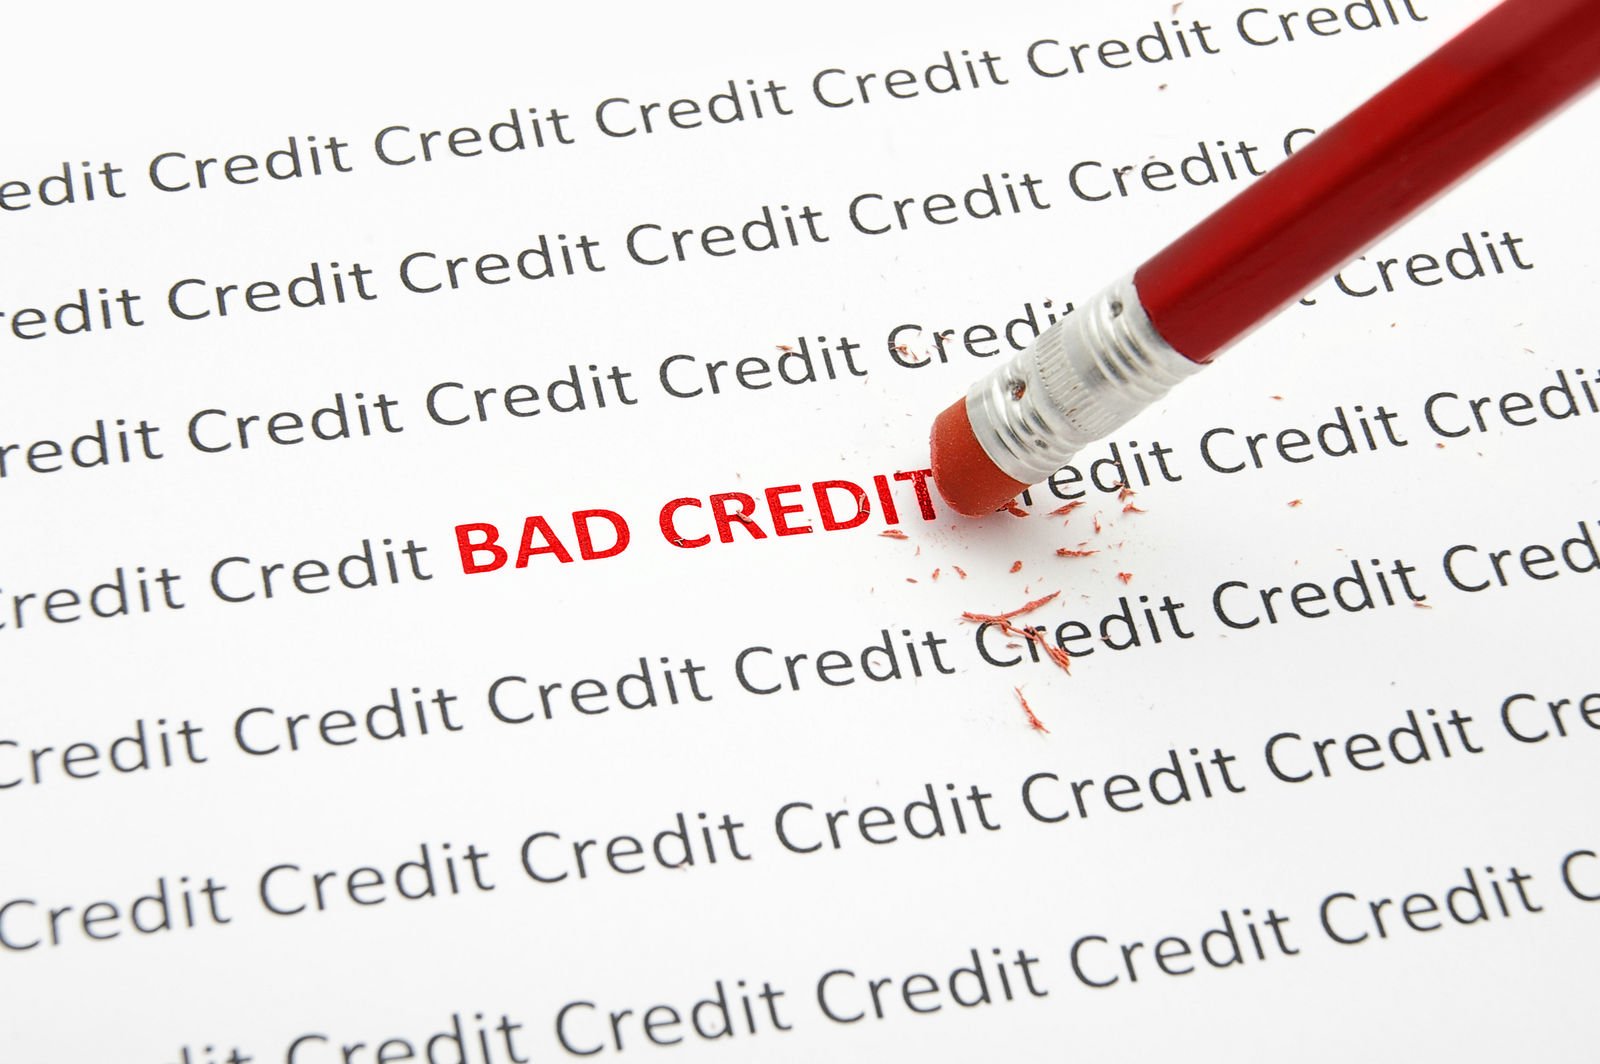 Car Insurance with No Credit Check Requirements